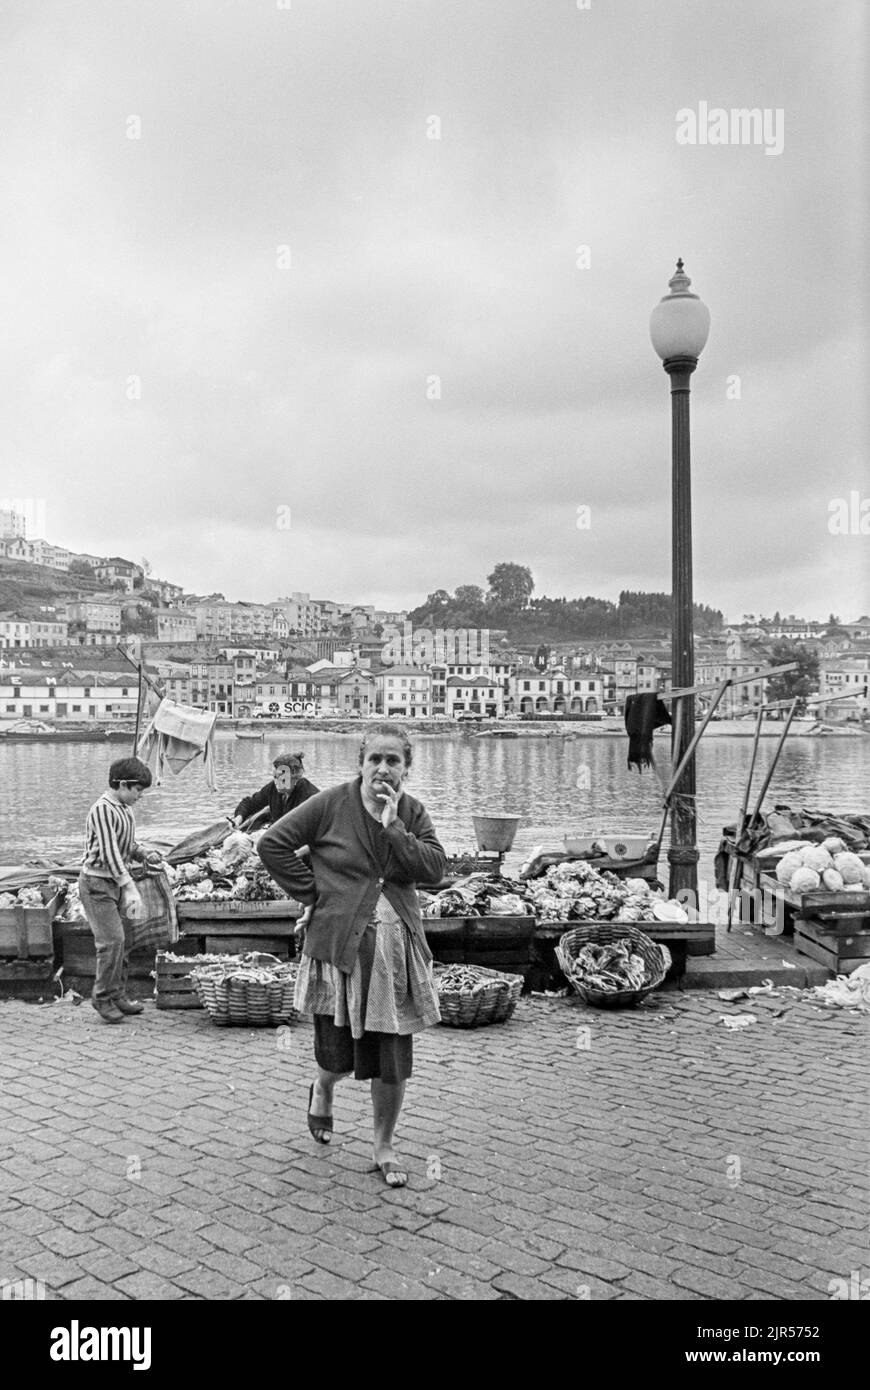 PORTUGAL - PORTO -  1970. A market by the river Douro in the Ribeira district of Porto, Northern Portugal.  Photograph Copyright Photograph: by Peter Stock Photo